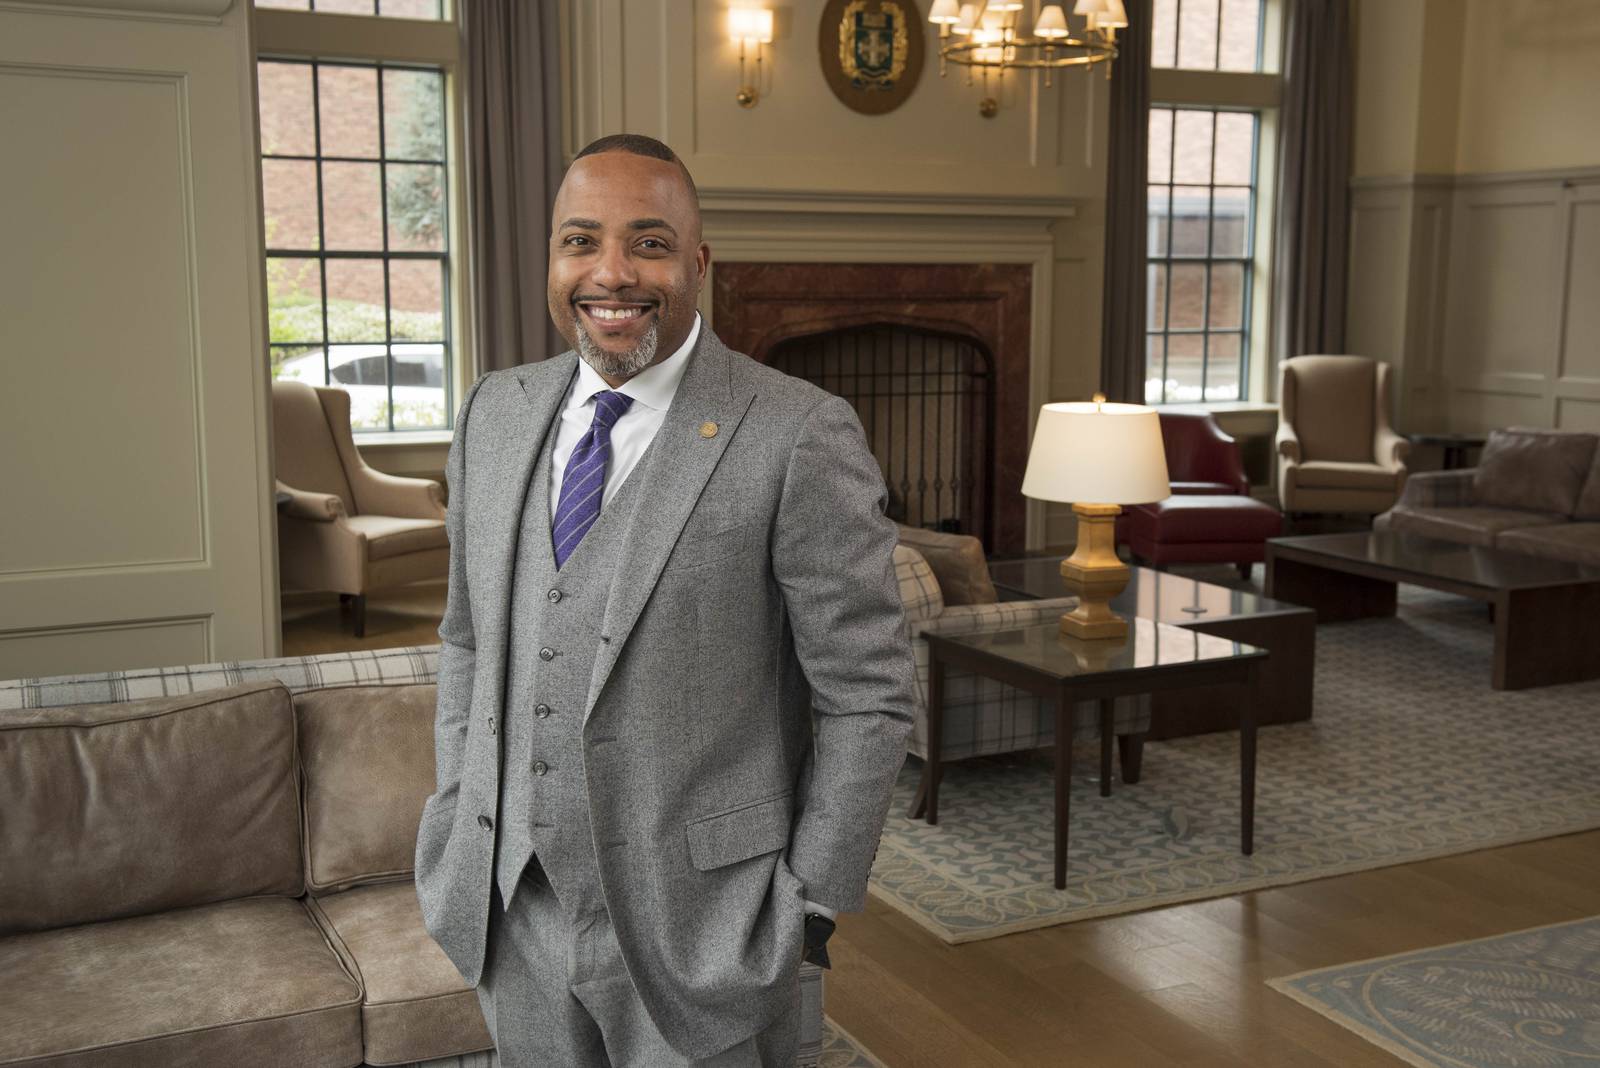 Dr. Robert Kelly named first African-American president at University of Portland